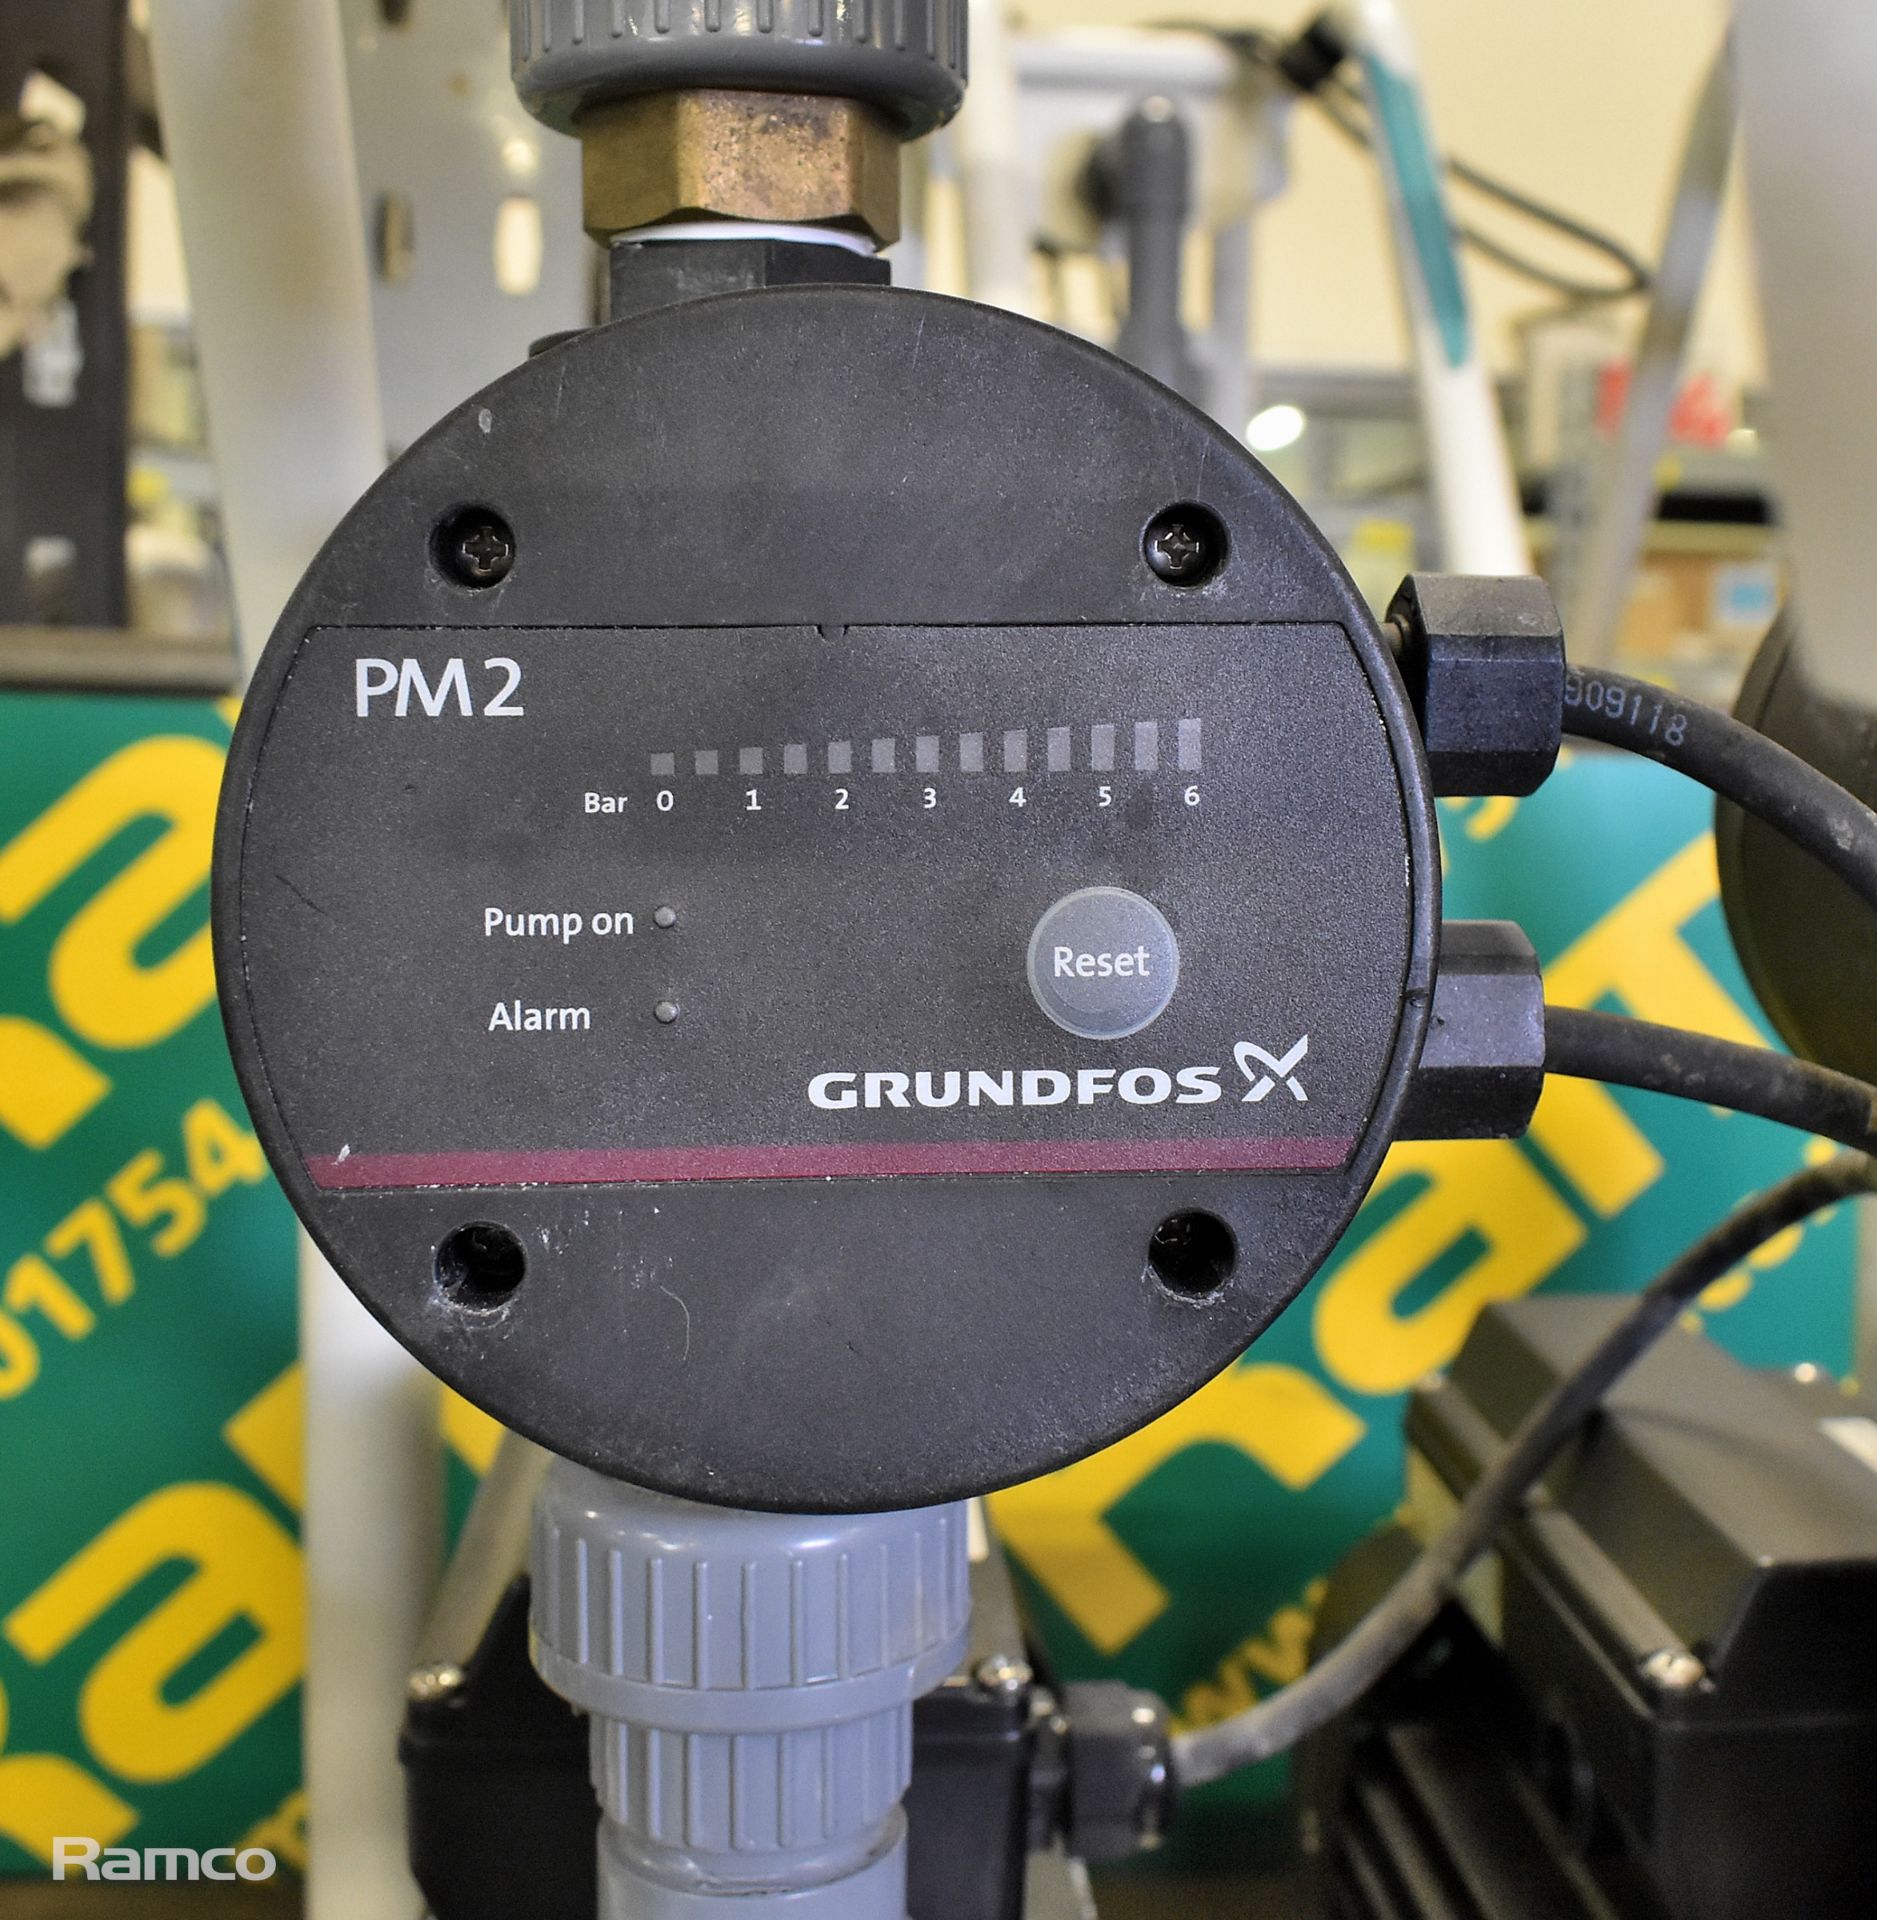 Grundfos JP 5 A-A-CVBP Horizontal Multi-stage Pump with Grundfos X PM 2 AD pressure manager - Image 7 of 9